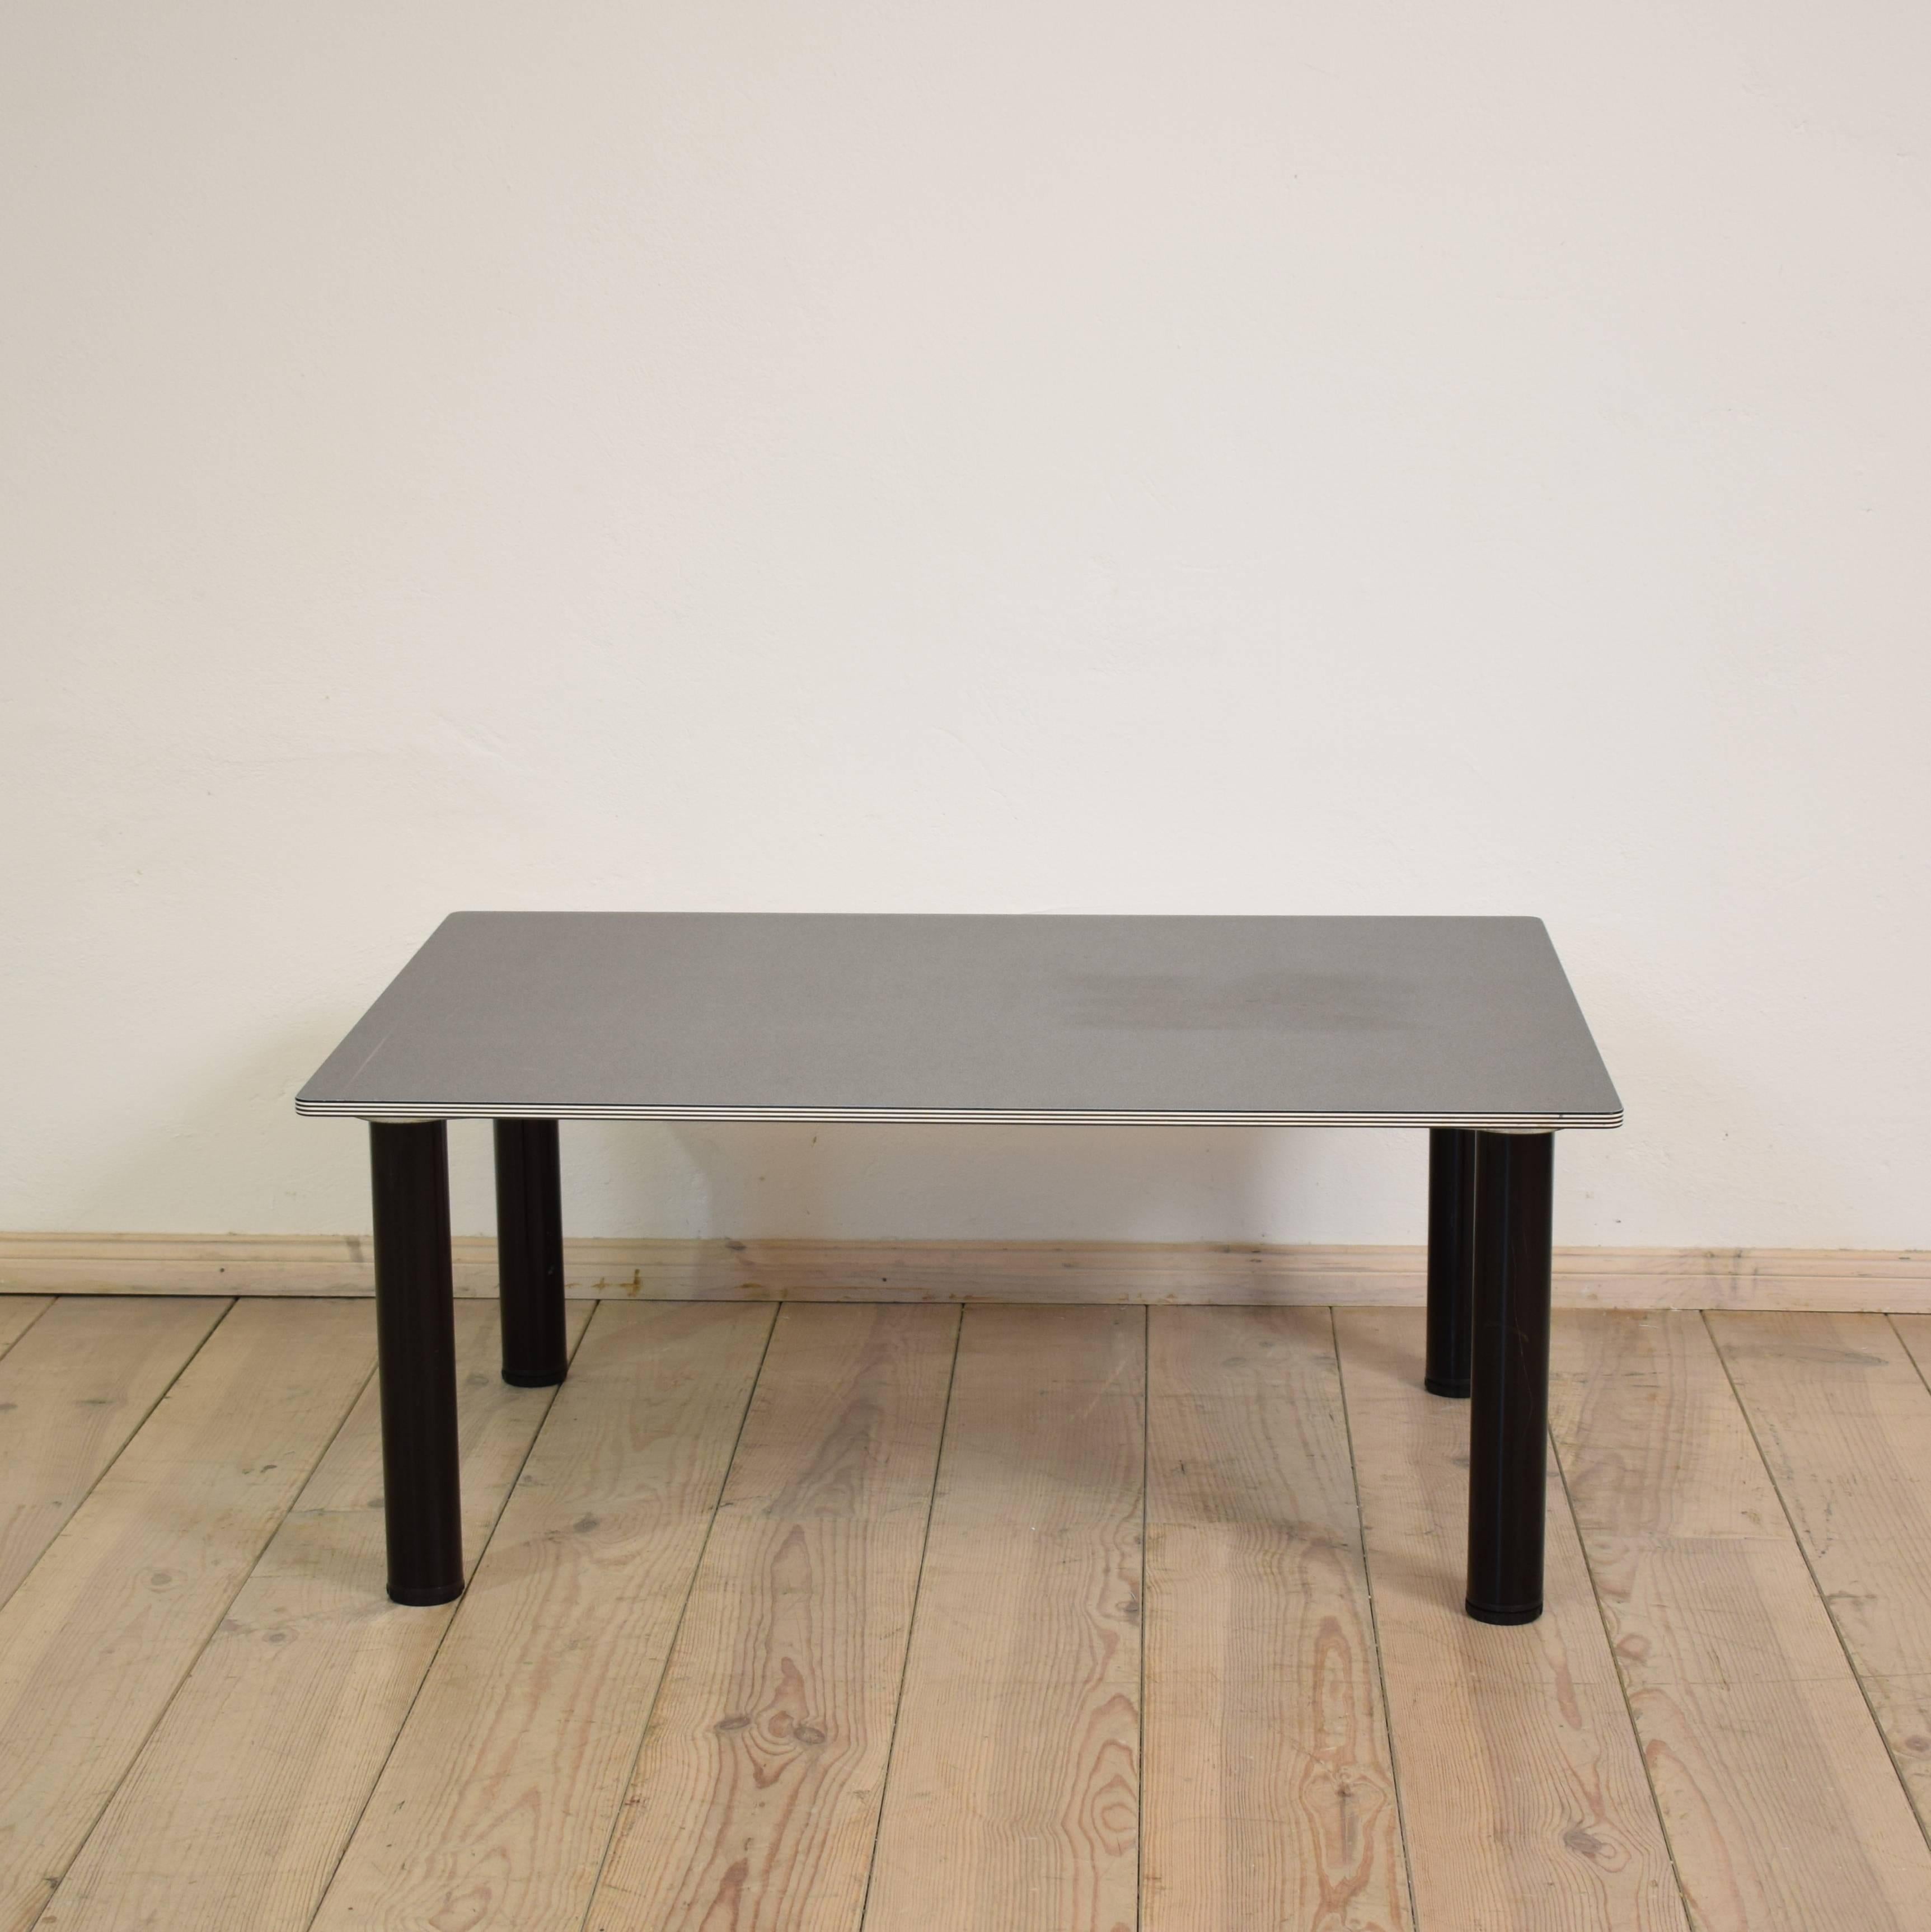 This couch table was designed and built in the mid-1980s in Italy.
It is made out of different plastic materials and metal.
The legs can be screw-on.
The top has got a small scratch (have a look at the photos)
A elegant and simple design which